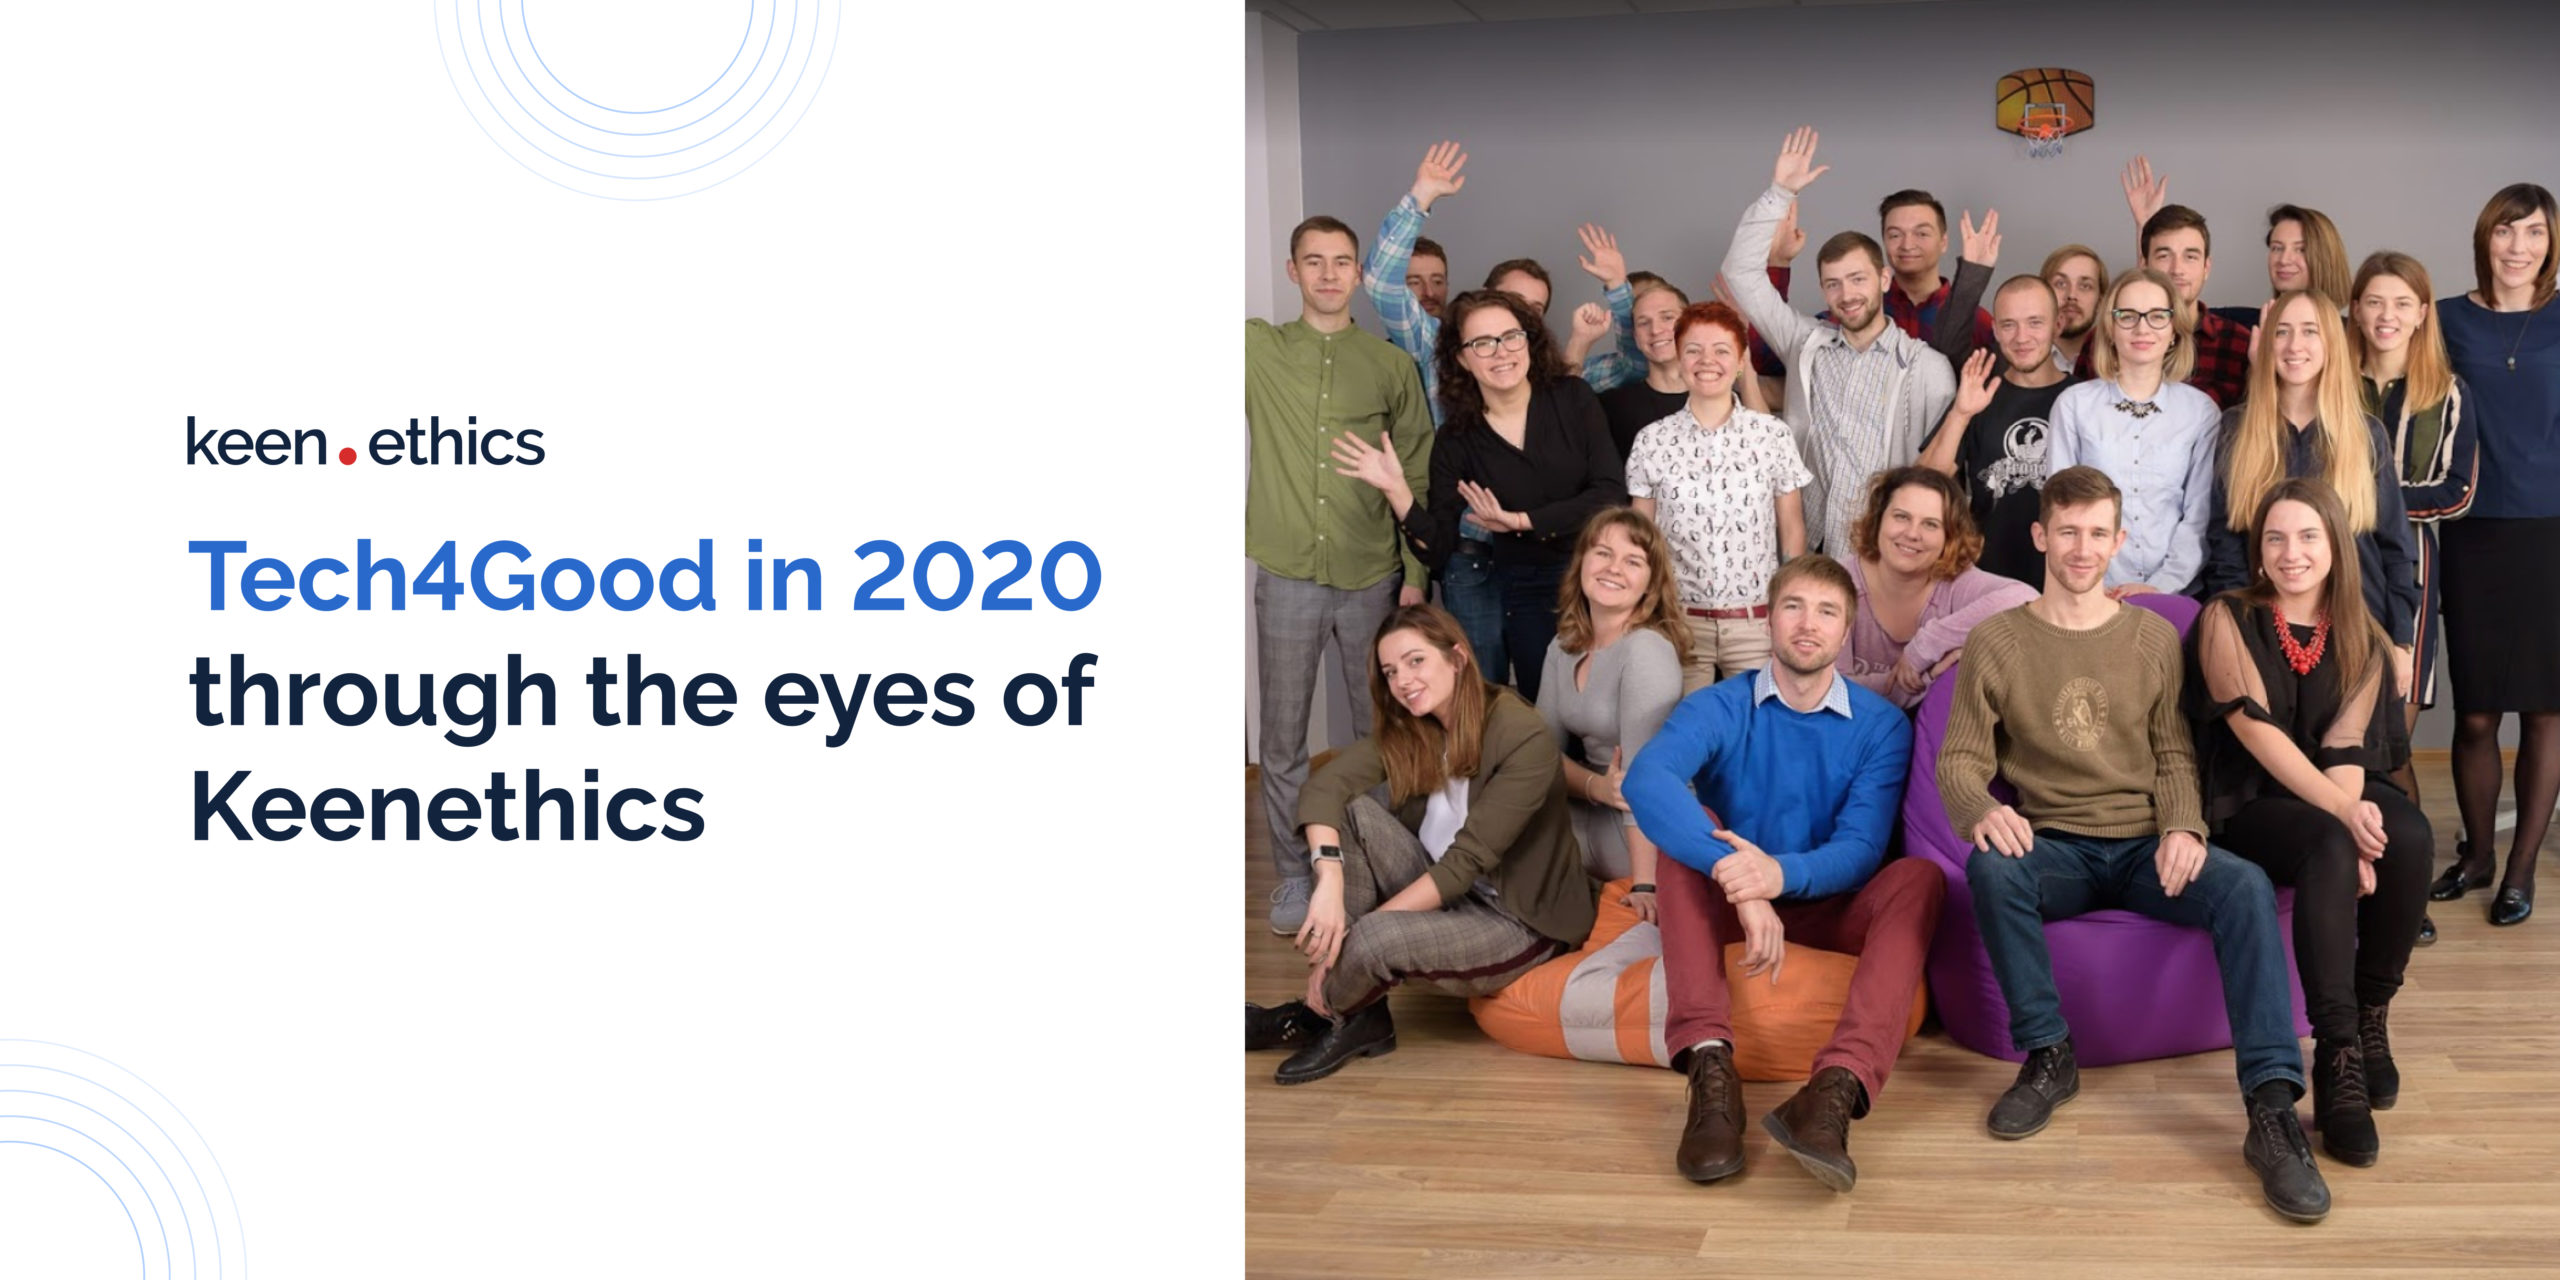 Tech4Good in 2020 through the eyes of Keenethics